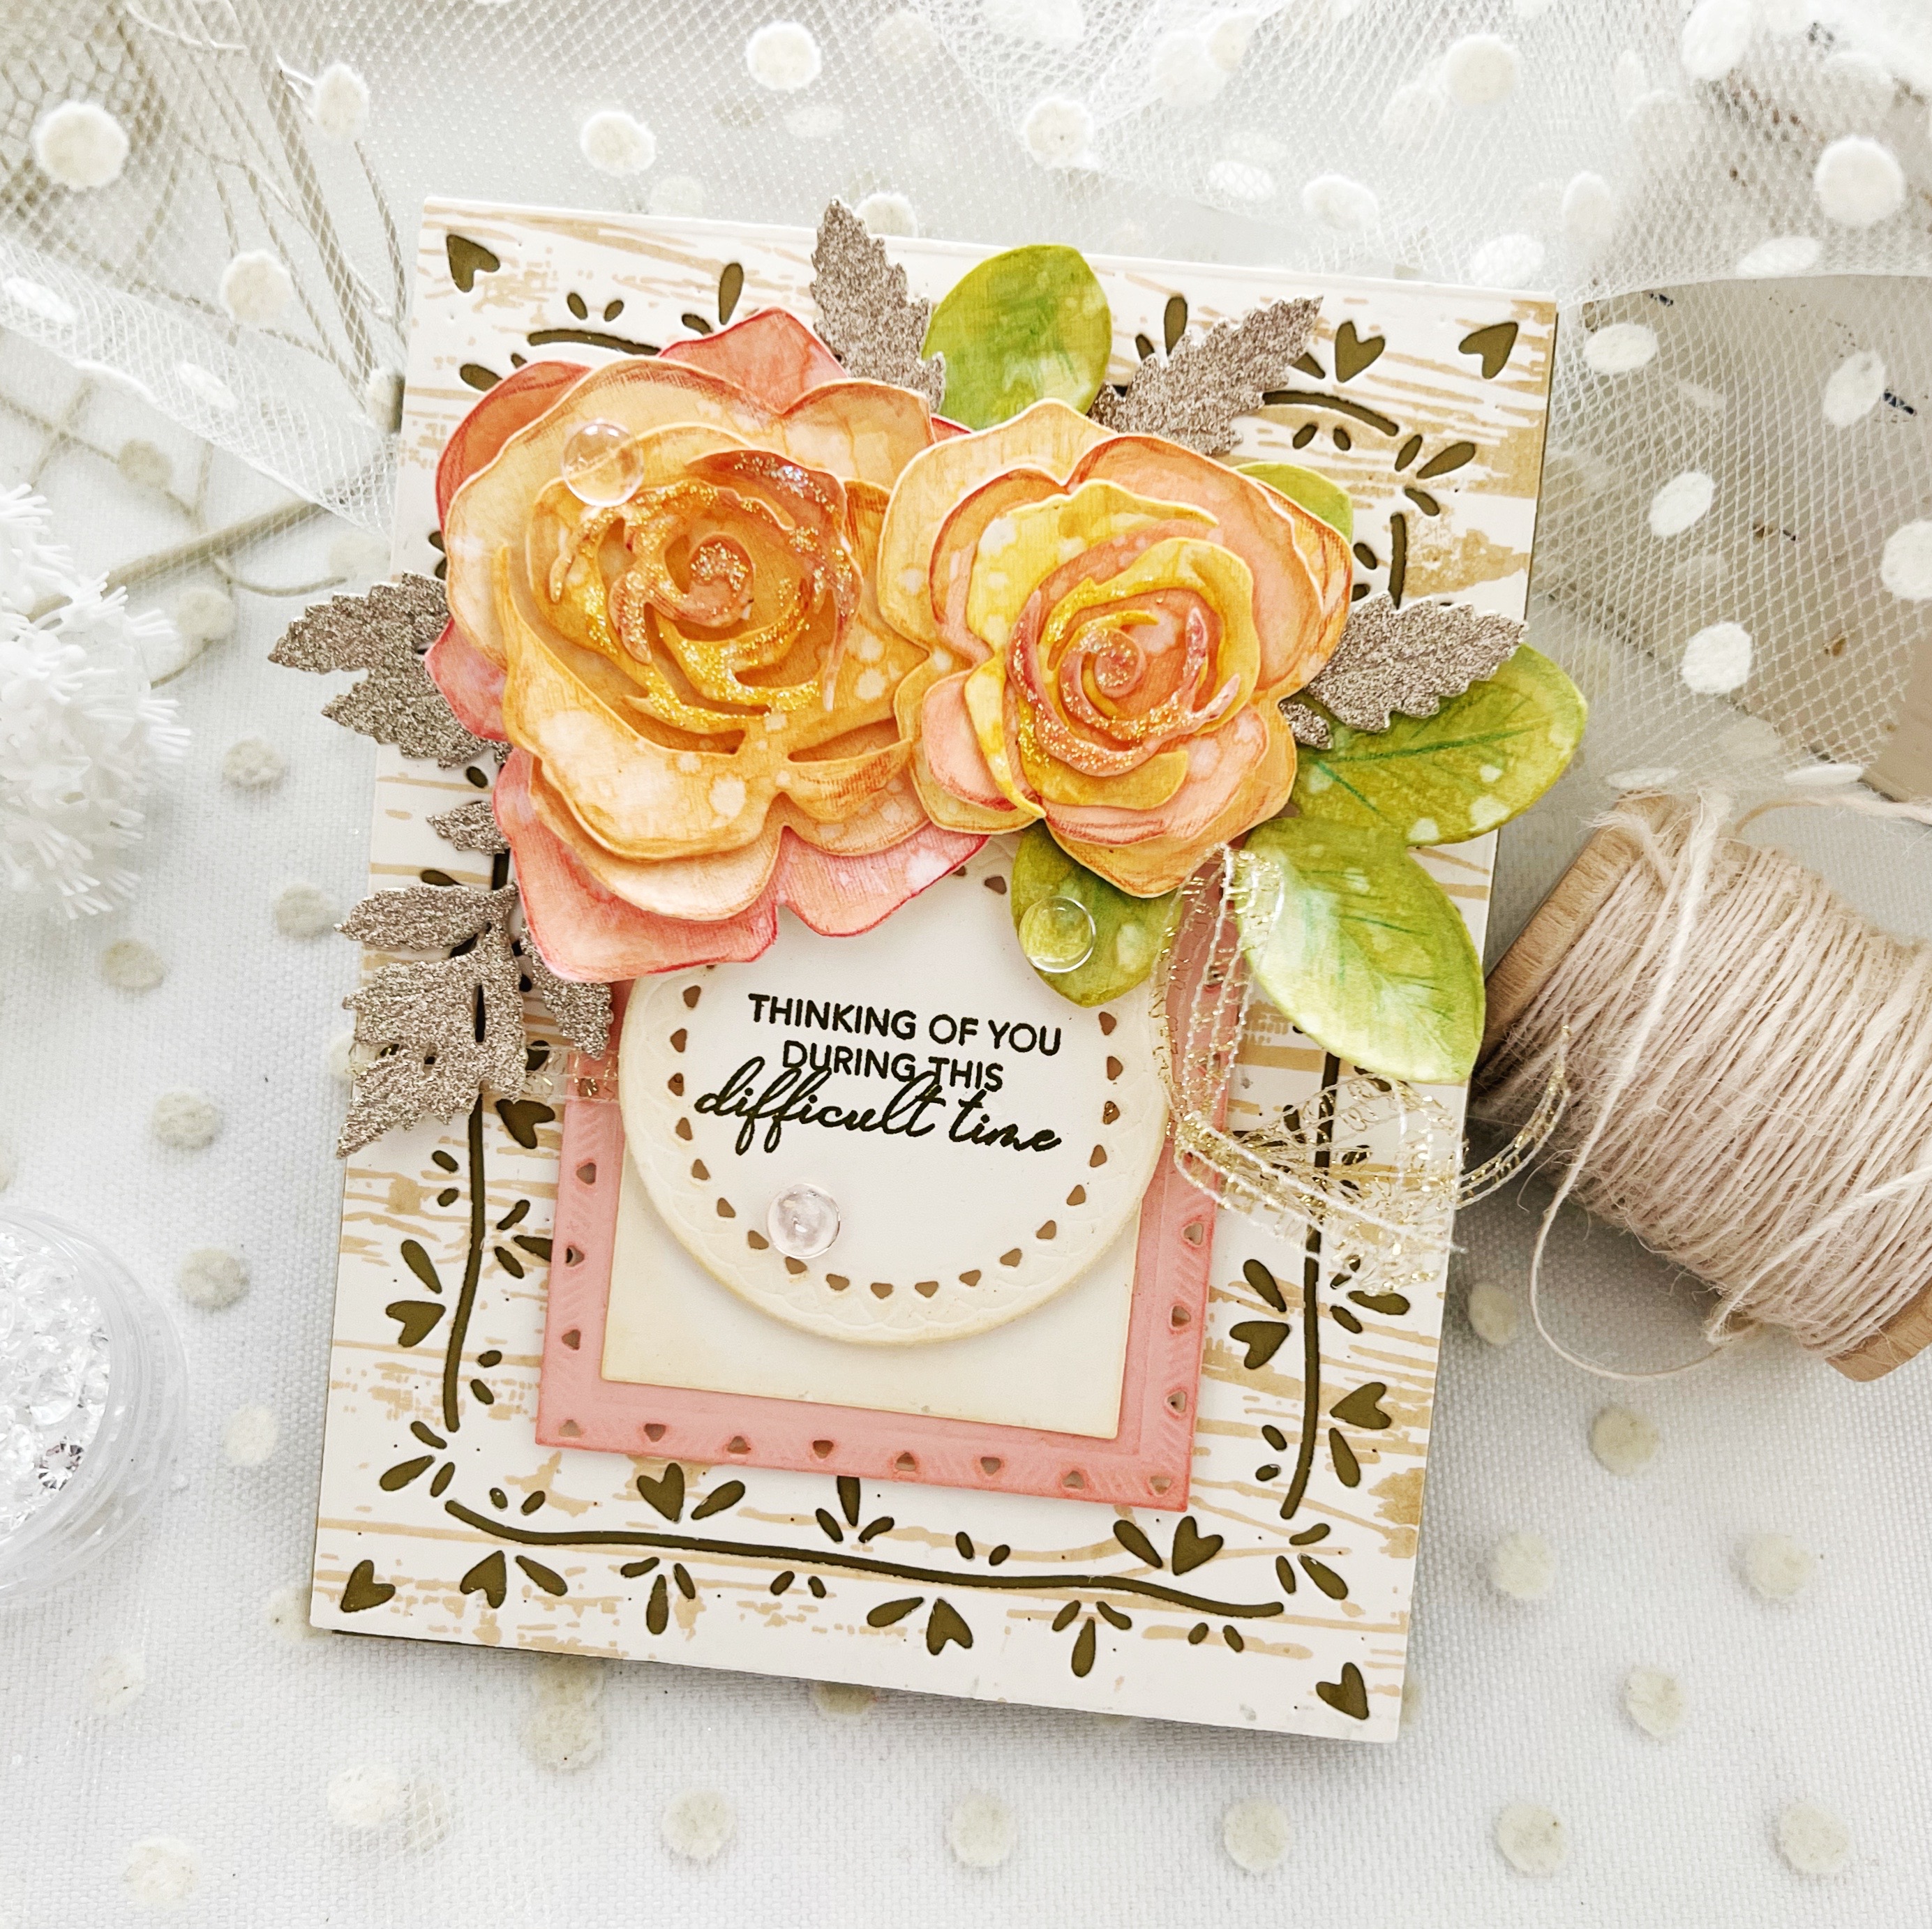 Just Sentiments: With Sympathy Mini Stamp Set